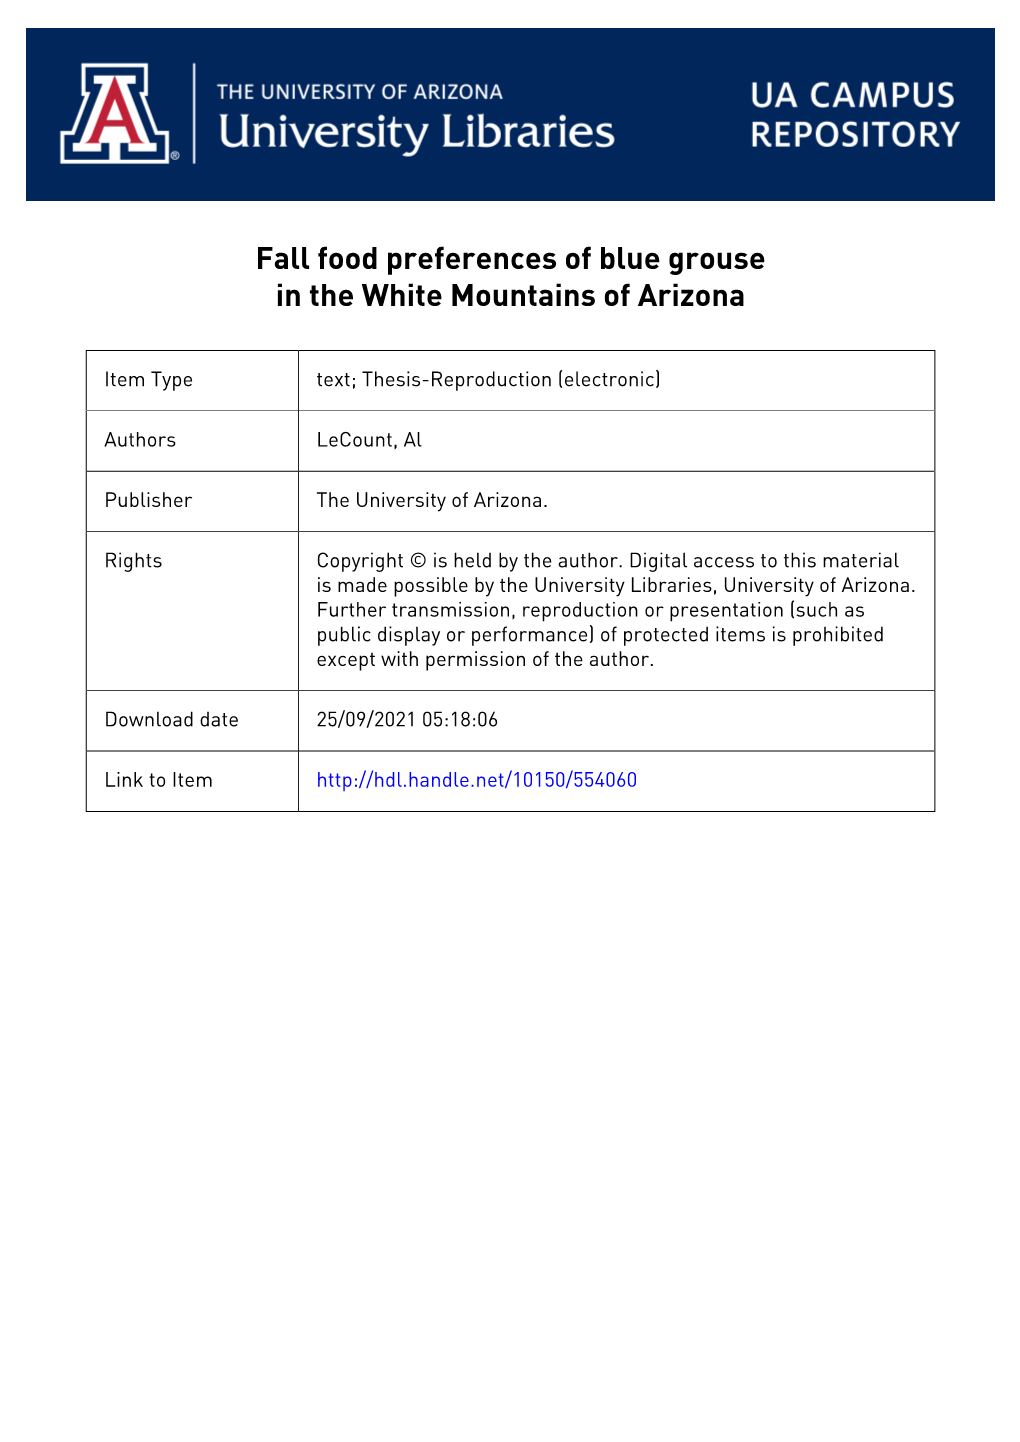 Fall Food Preferences of Blue Grouse in the White Mountains of Arizona